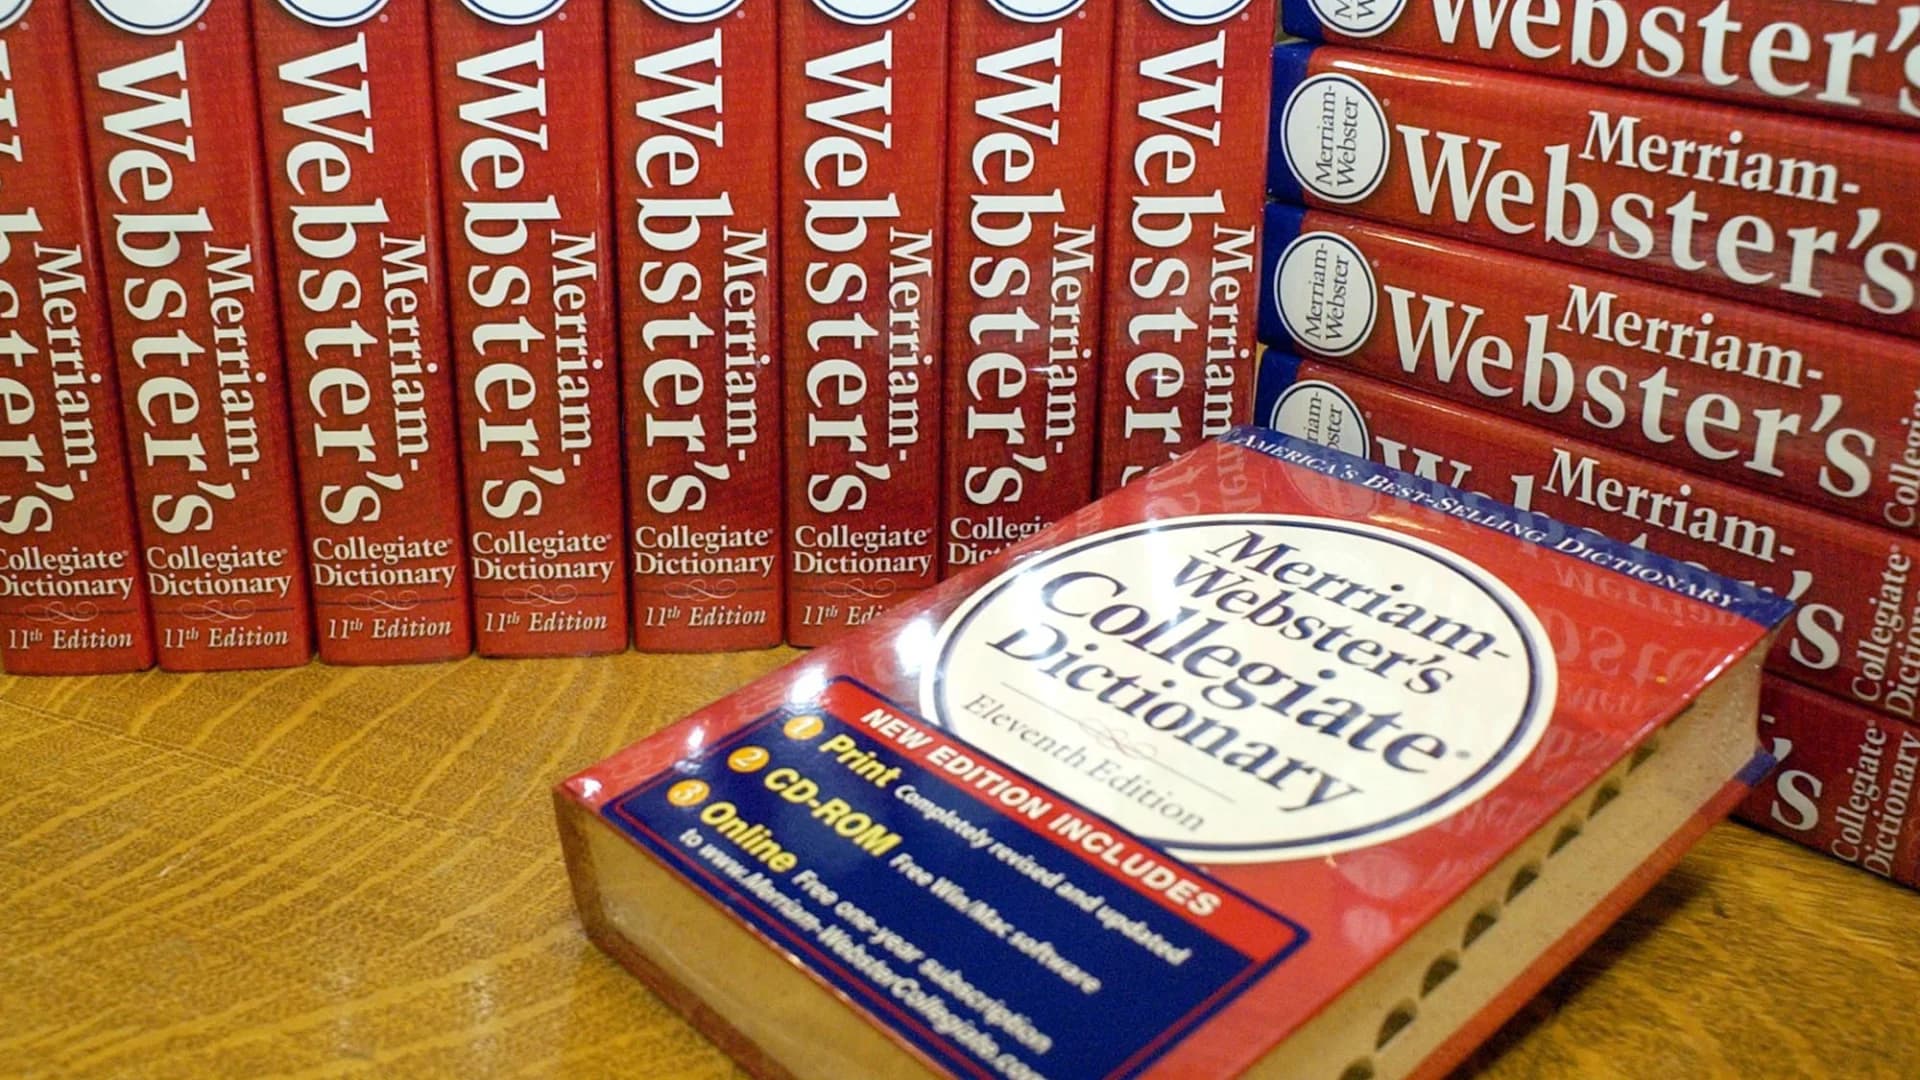 'Gaslighting' is Merriam-Webster's word of the year for 2022